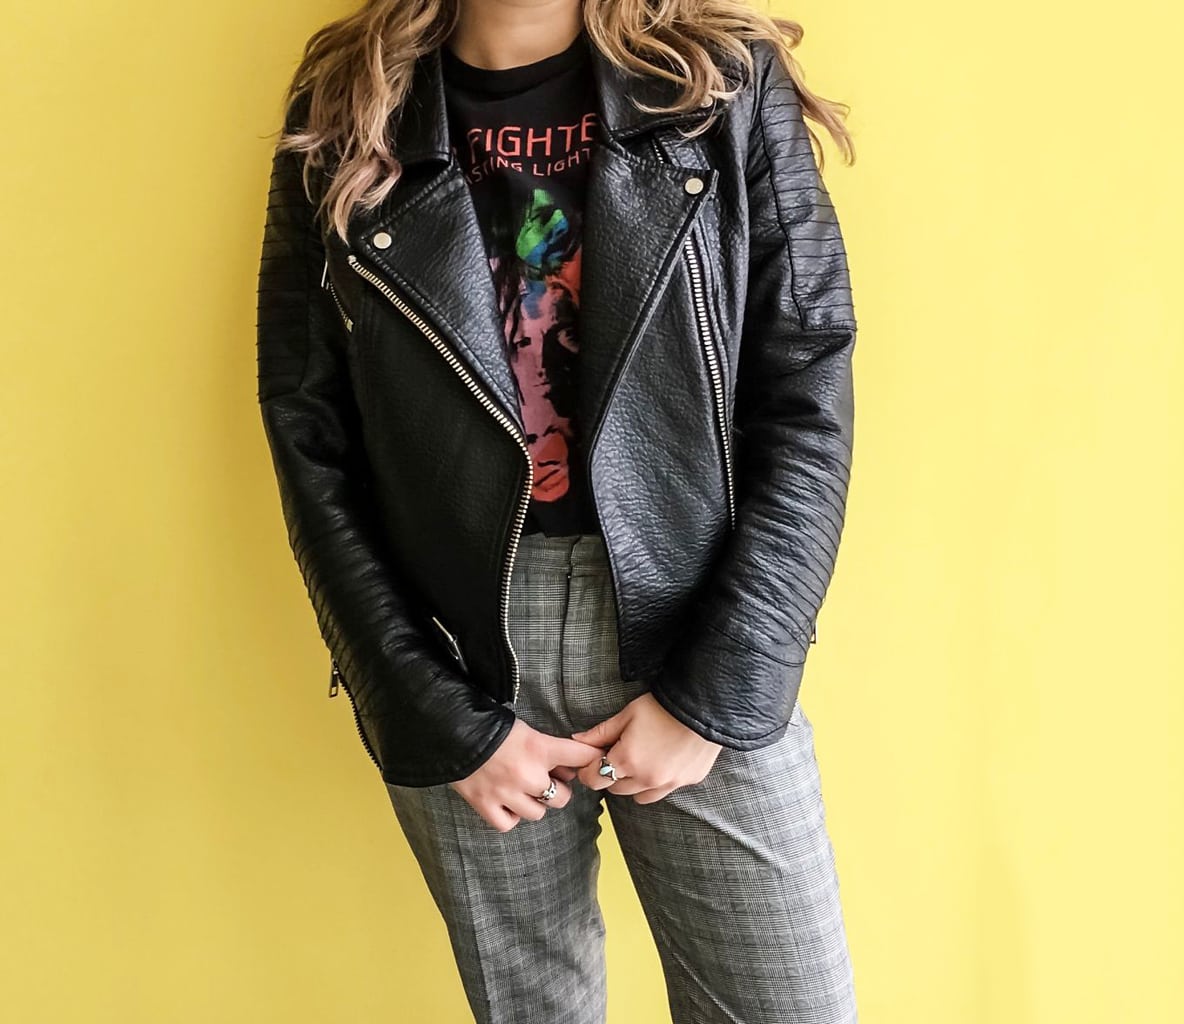 This black leather motorcycle jacket is paired with her Foo Fighters band tee and checkered trousers.